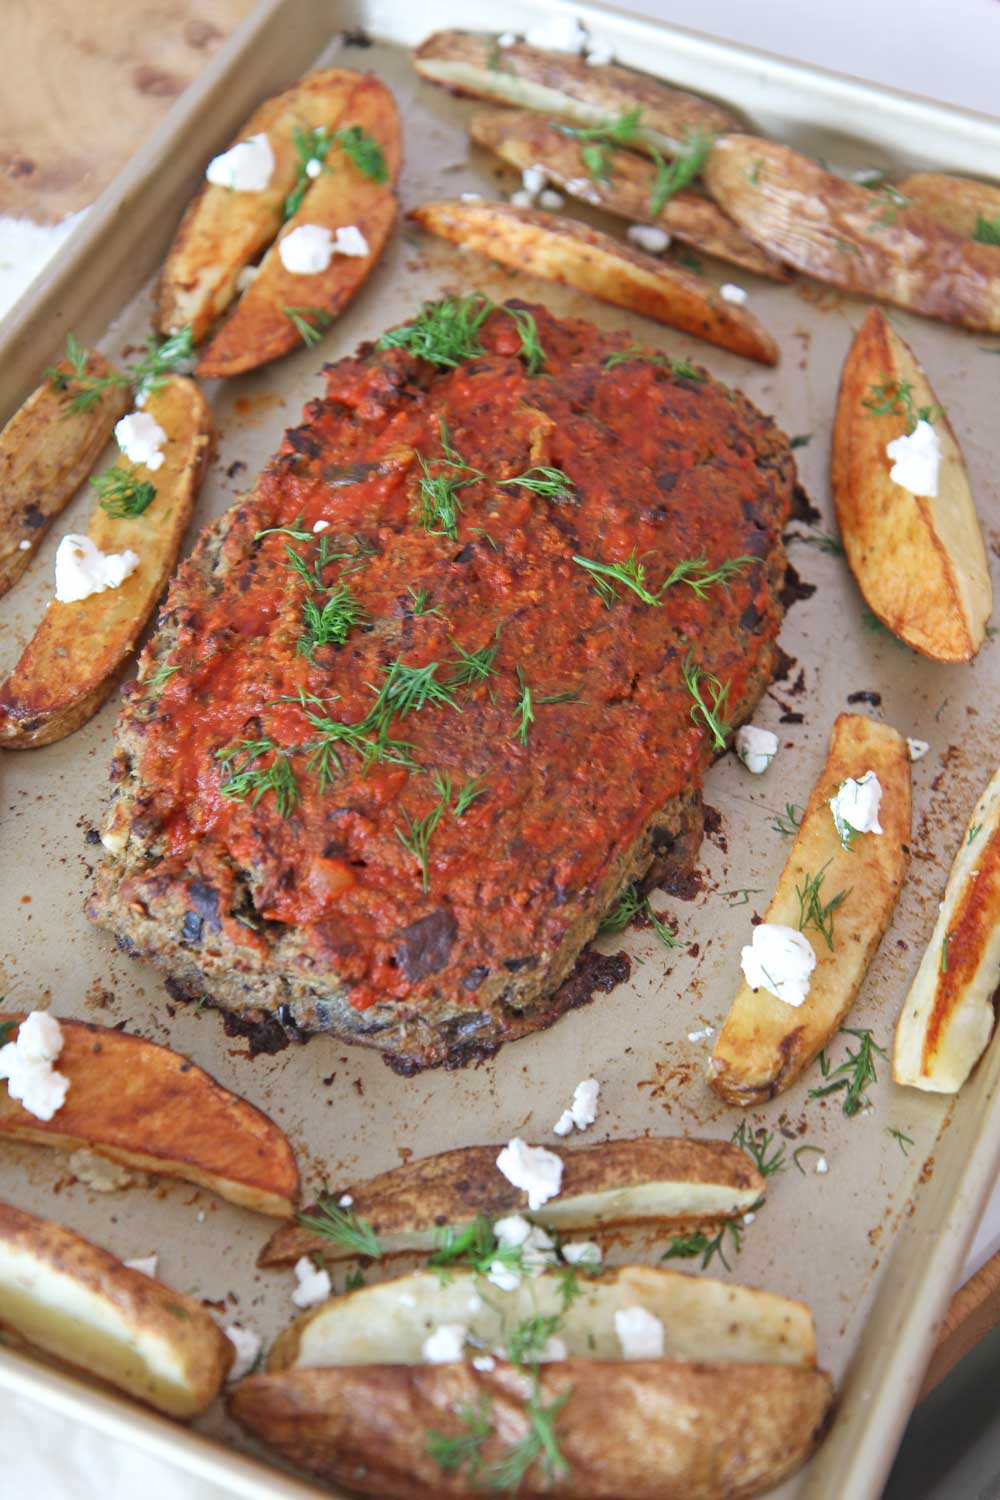 How To Make Eggplant Meatloaf Recipe. This is the perfect meatless Monday sheet pan dinner. The whole meatloaf is made from eggplant, pantry seasonings, cheese olives, and herbs. Perfect vegetarian meatloaf recipe. Happy Cooking! www.ChopHappy.com #eggplantrecipe #vegetarianmeatloaf